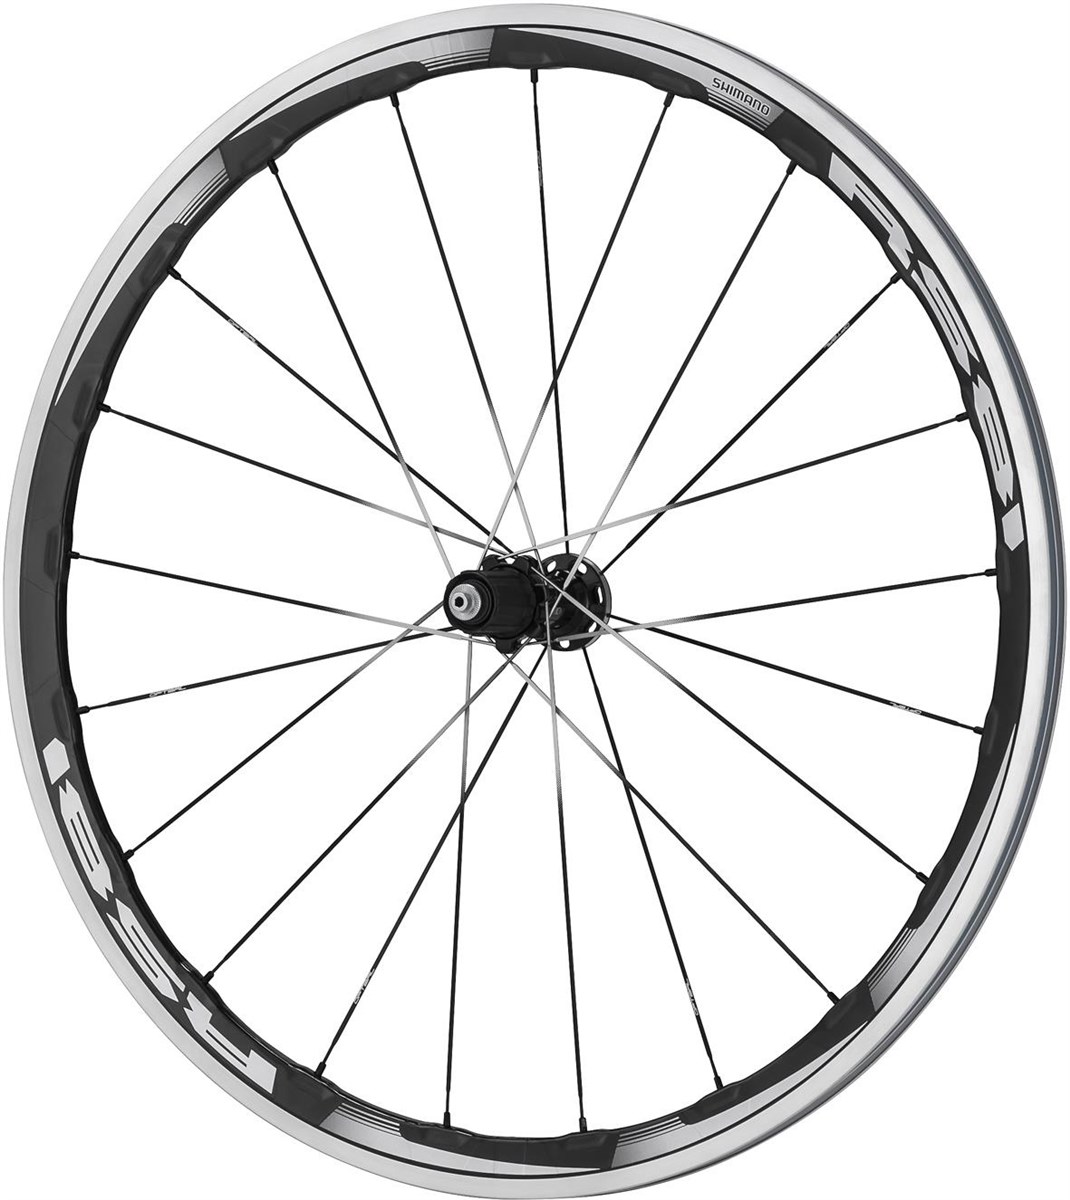 Shimano WH-RS81-C35-CL Wheel - Carbon Laminate Clincher 35 mm - 11-Speed - Rear product image